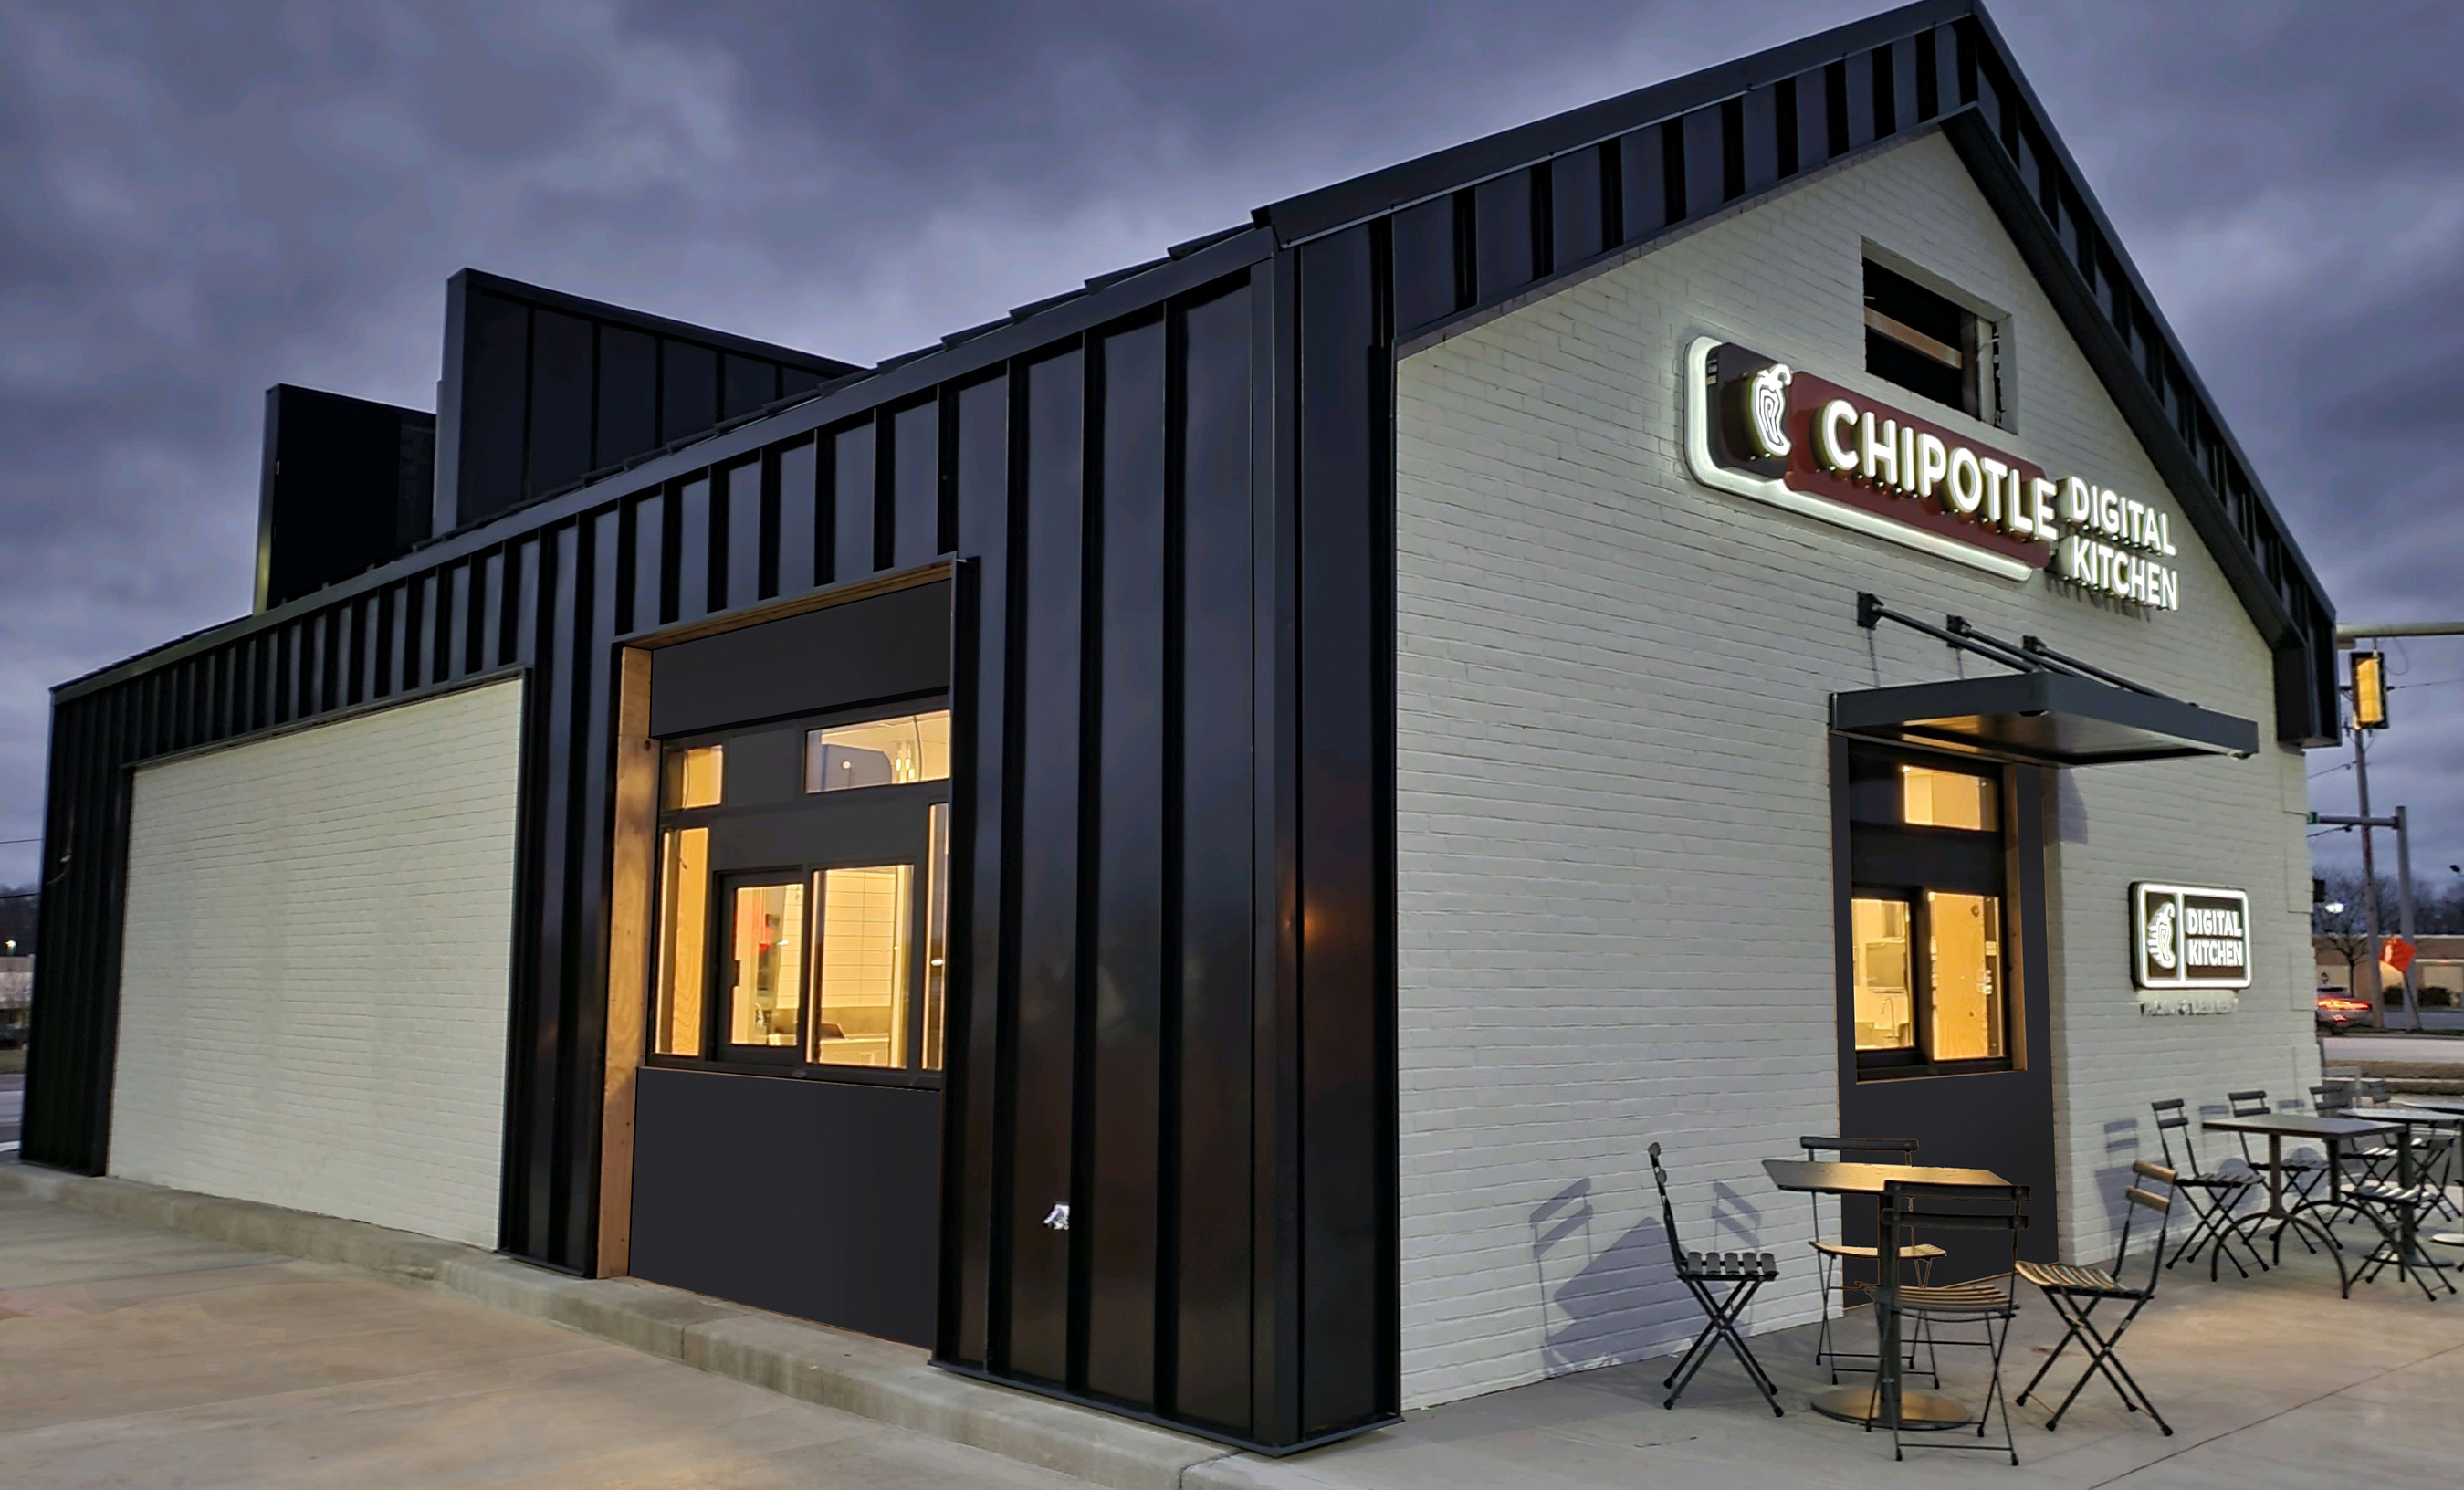 Chipotle’s latest digital-only restaurant prototype offers a Chipotlane and walk-up window for efficient digital order pickup.